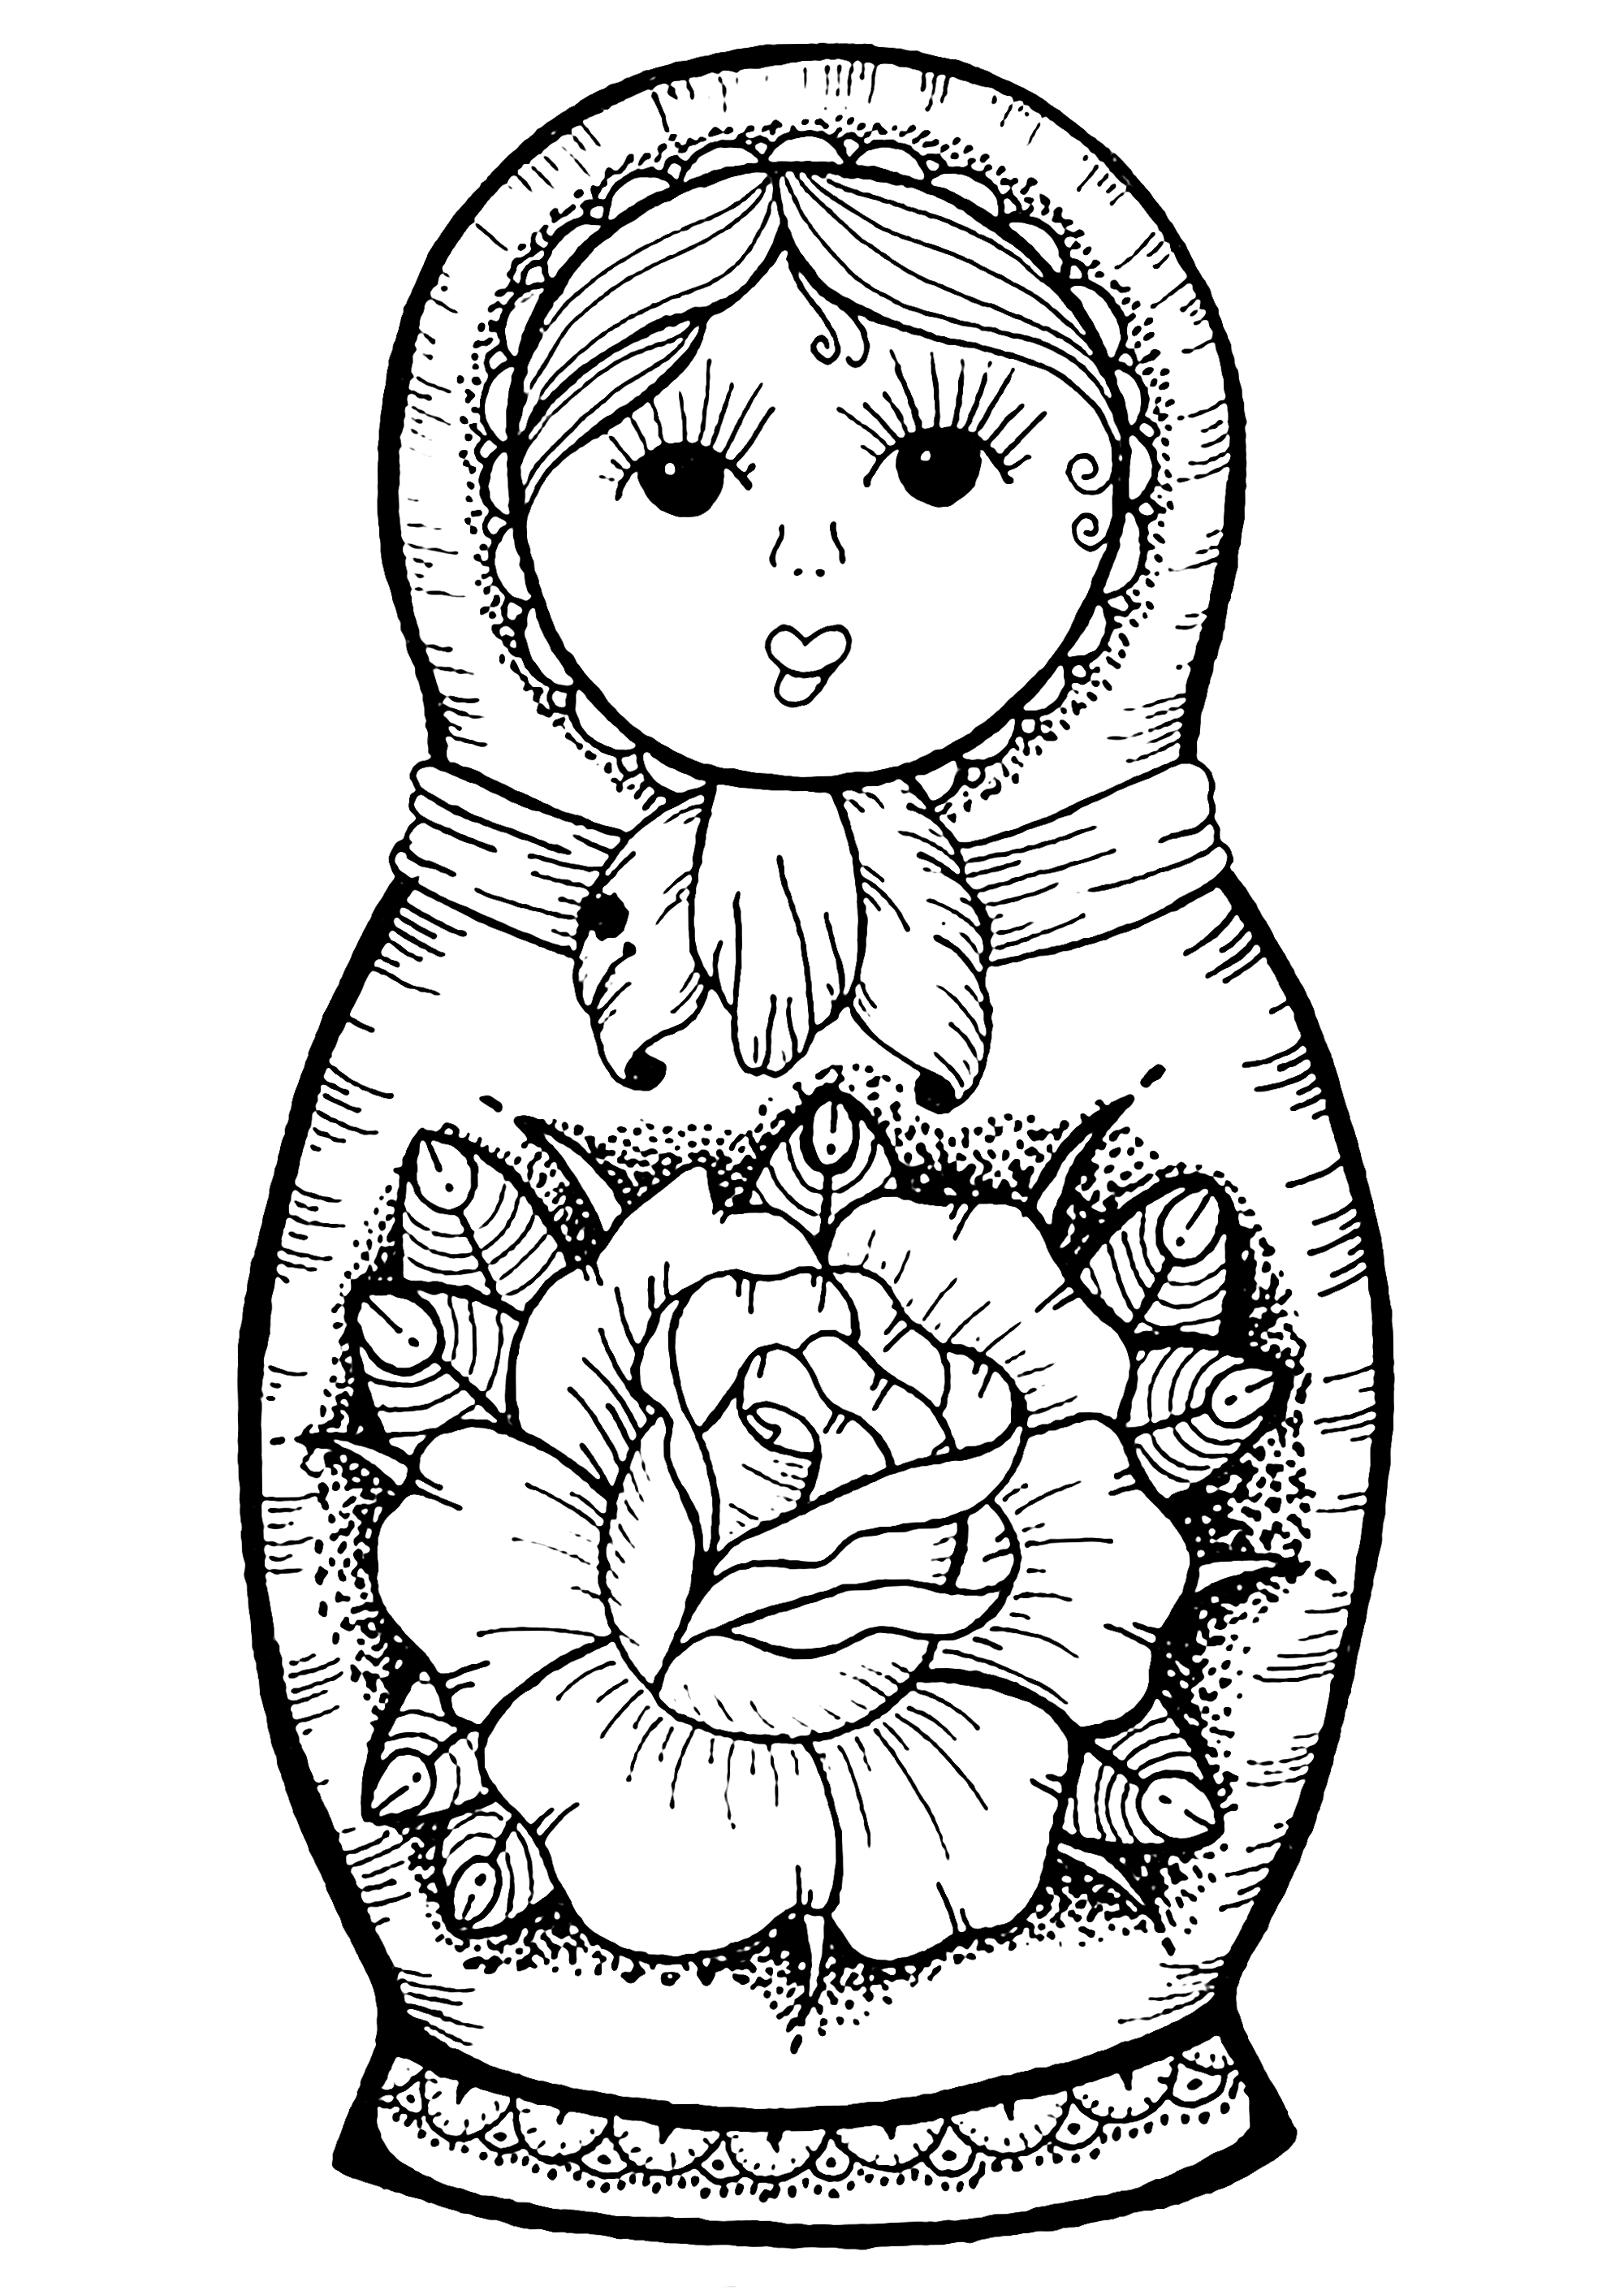 Color this hand drawn russian doll